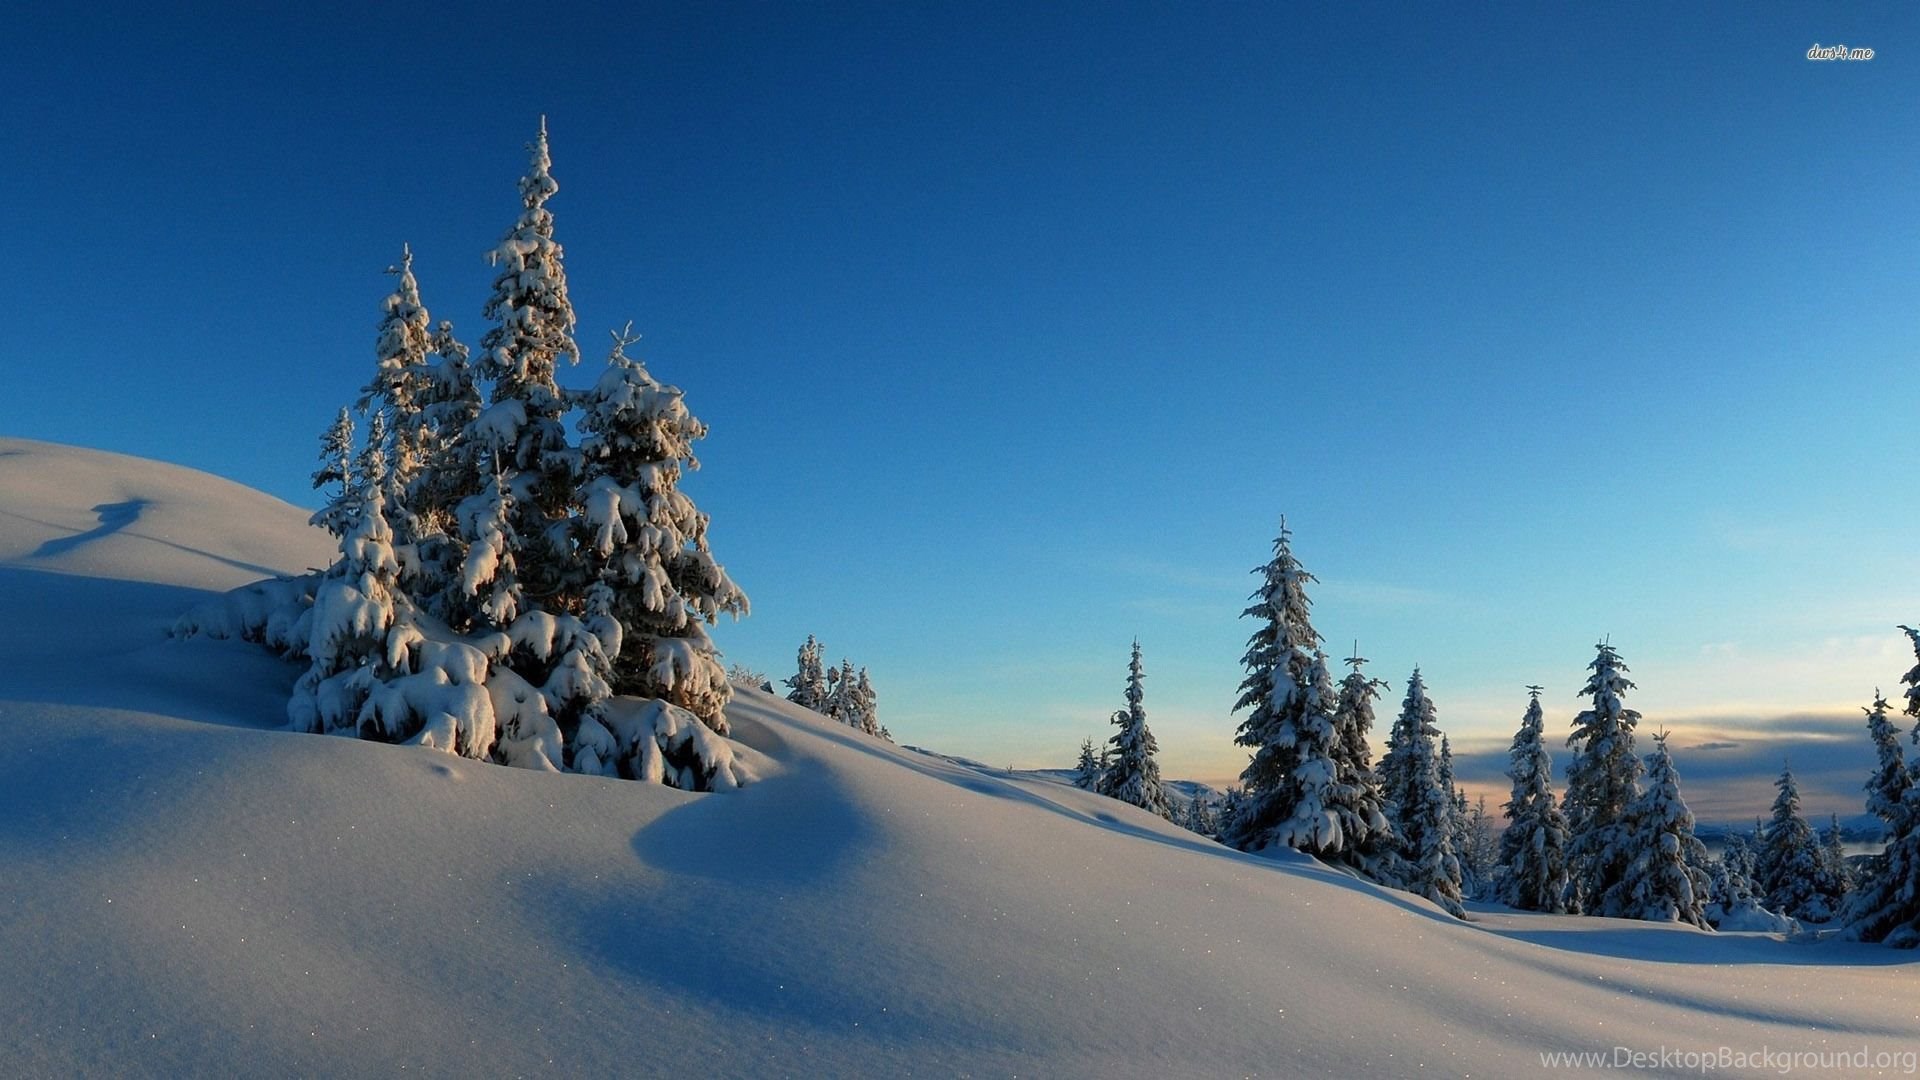 Sunny Winter Day In The Snowy Mountains Wallpaper Nature. Desktop Background